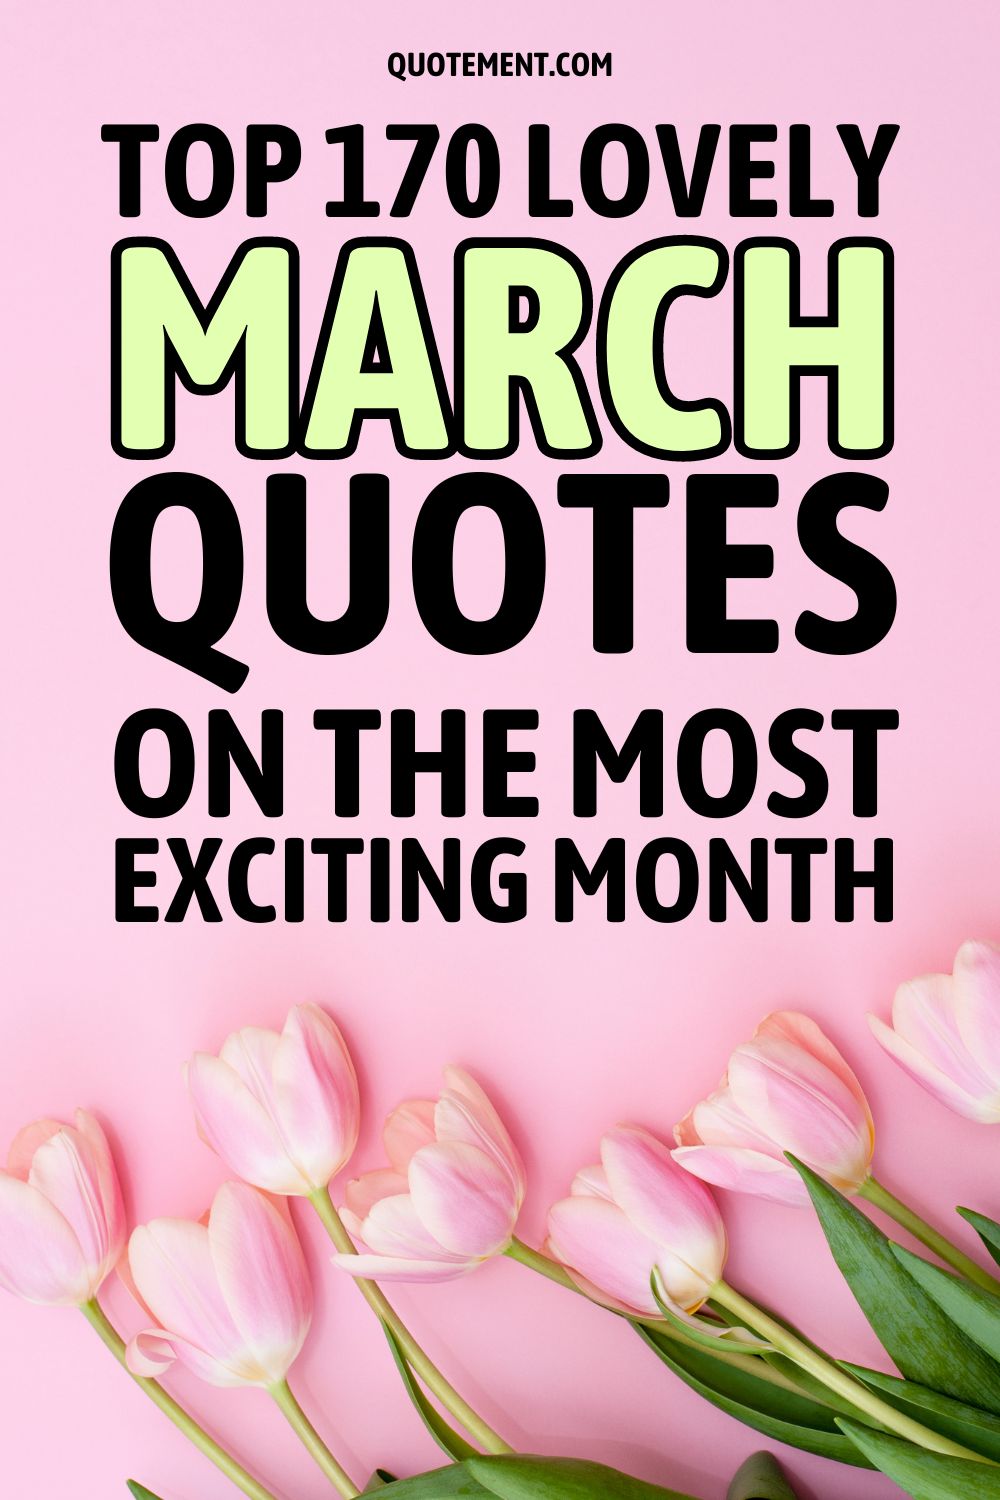 Top 170 Lovely March Quotes On The Most Exciting Month pinterest